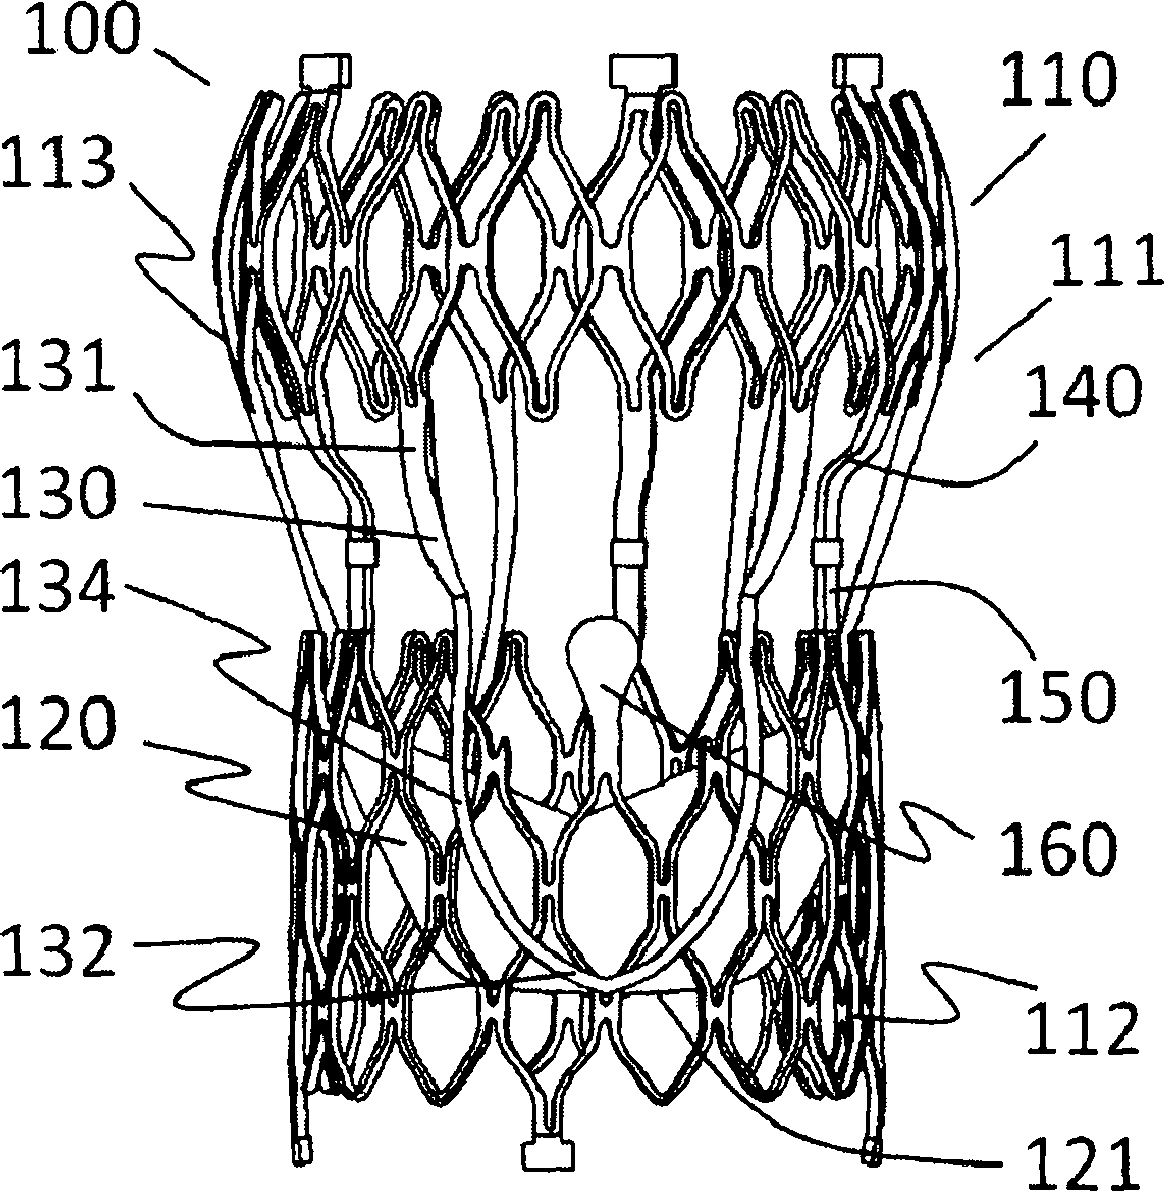 Artificial valve prosthesis with valve leaflet clamping device